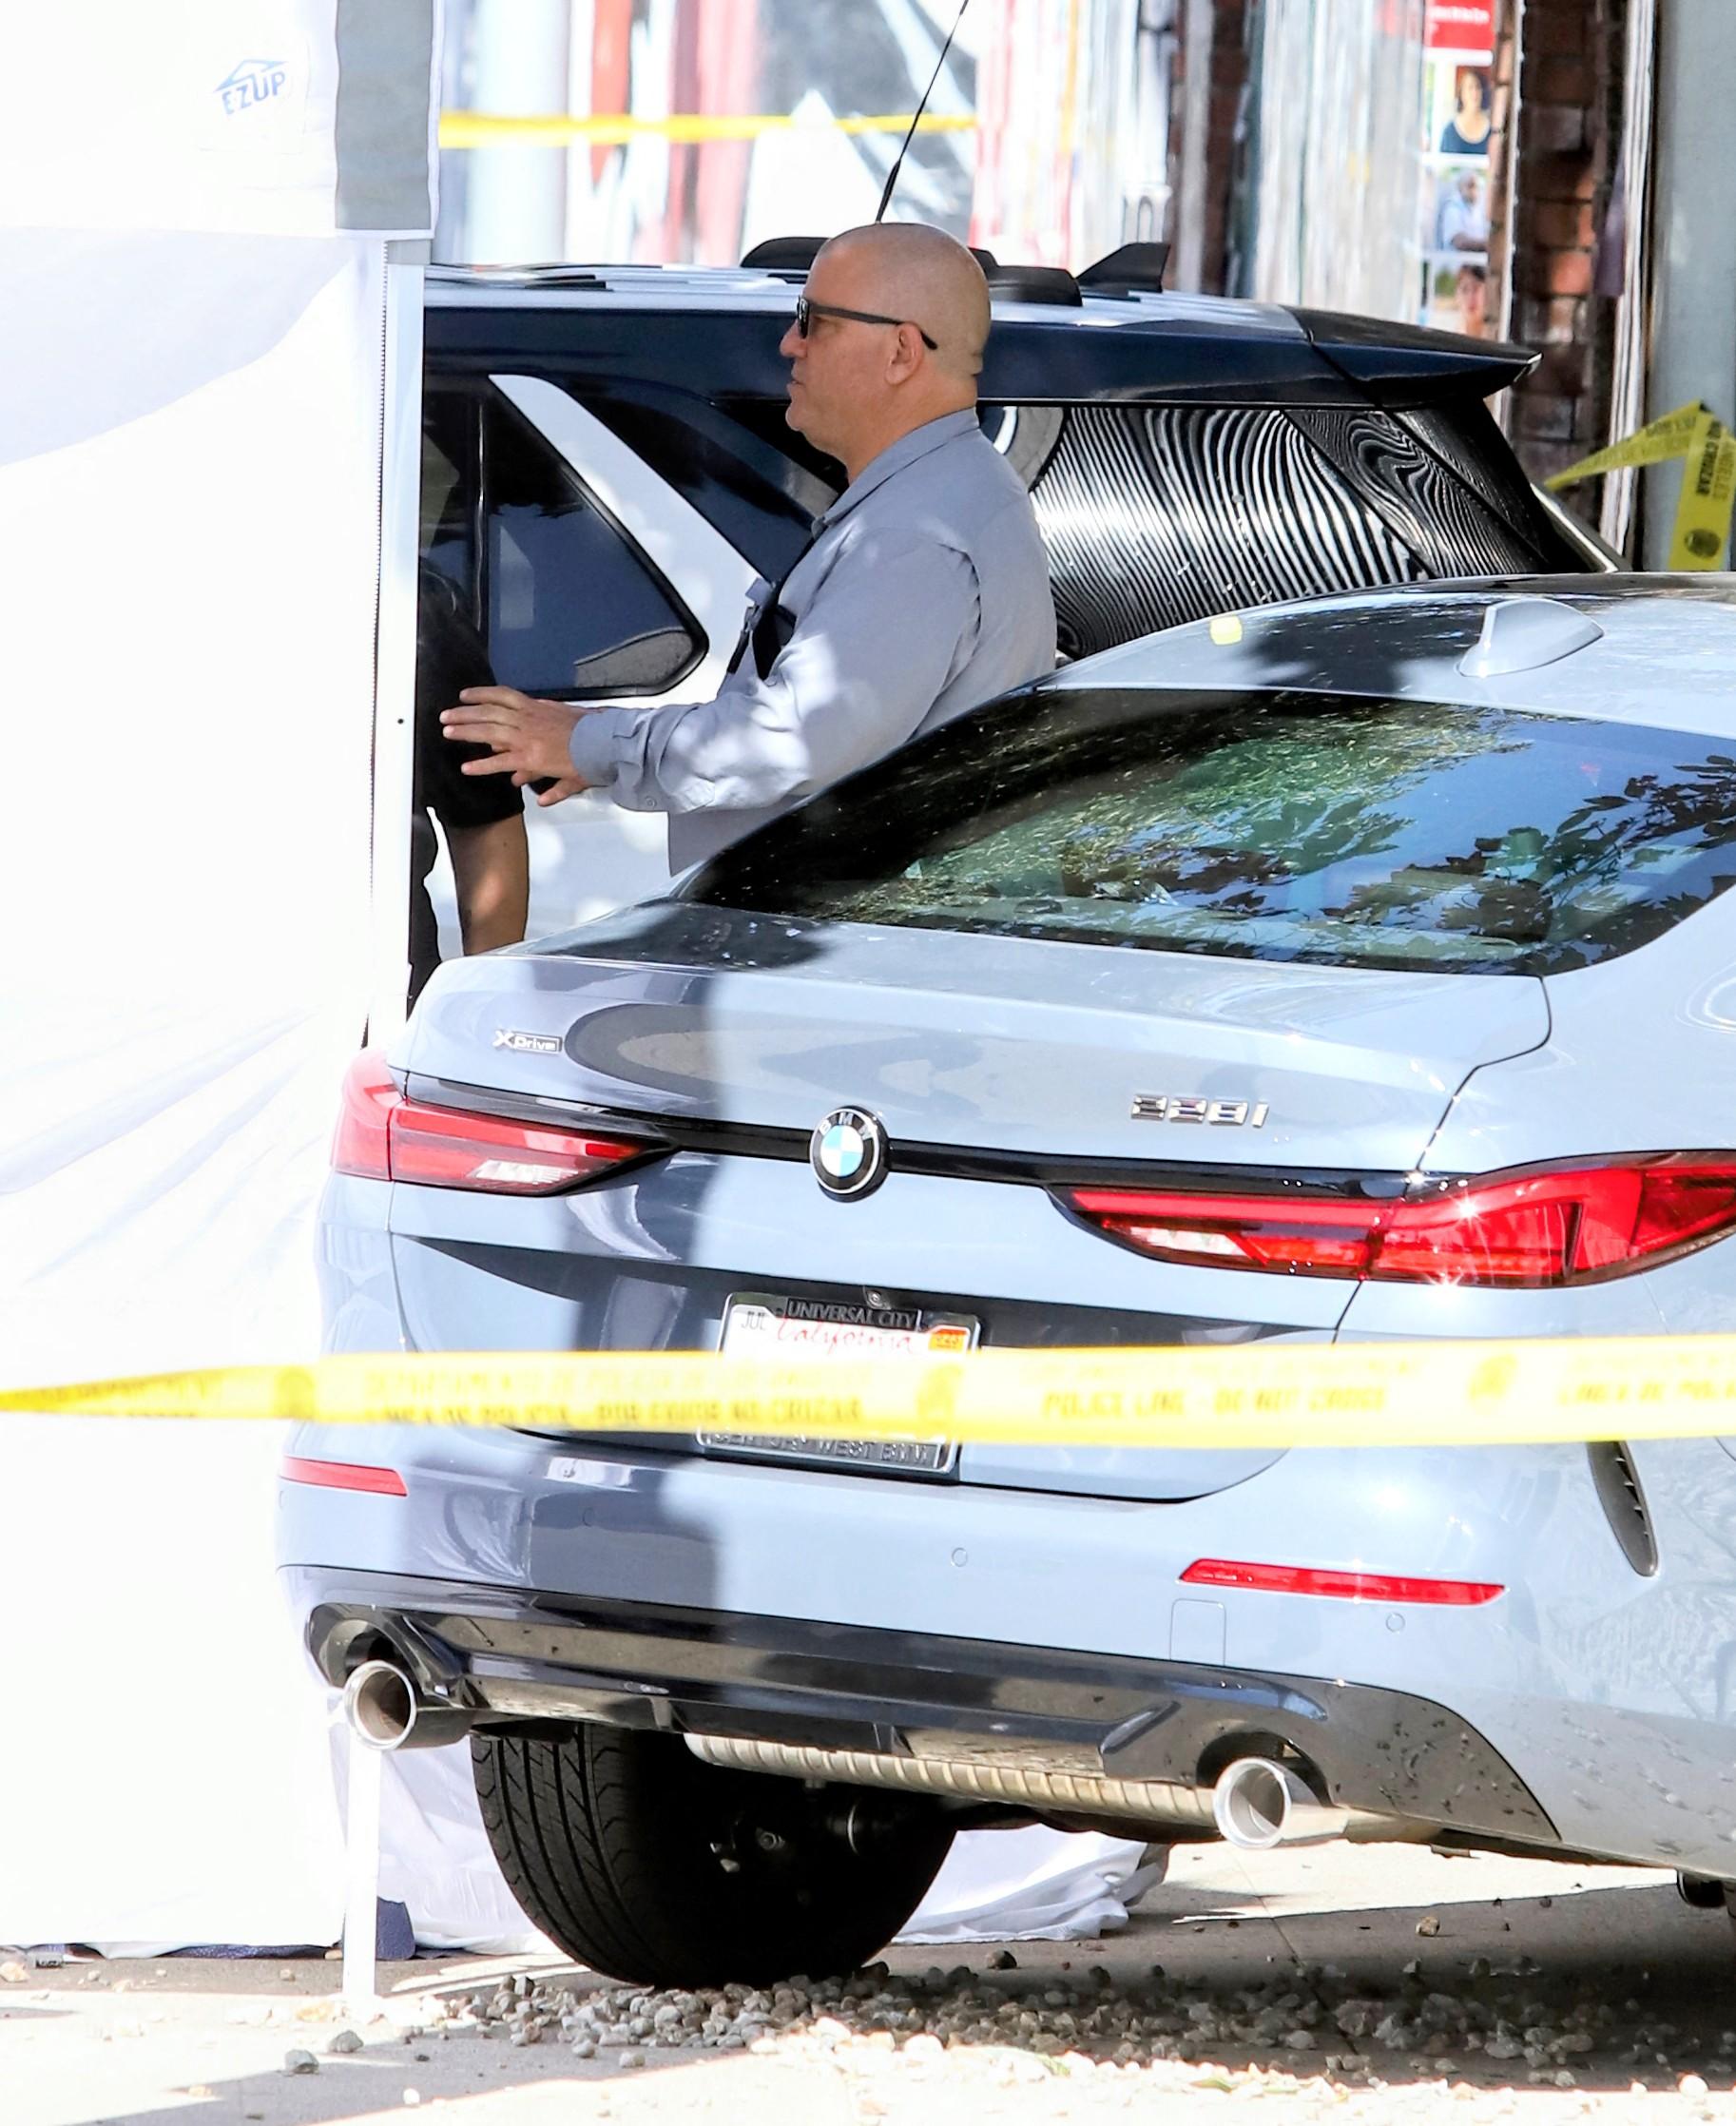 WARNING Contains Graphic Content The Los Angeles city coroner is seen at the crash site of Leslie Jordan who died this morning after reportedly suffered some sort of medical emergency and crashed his BMW into the side of a building in Hollywood C